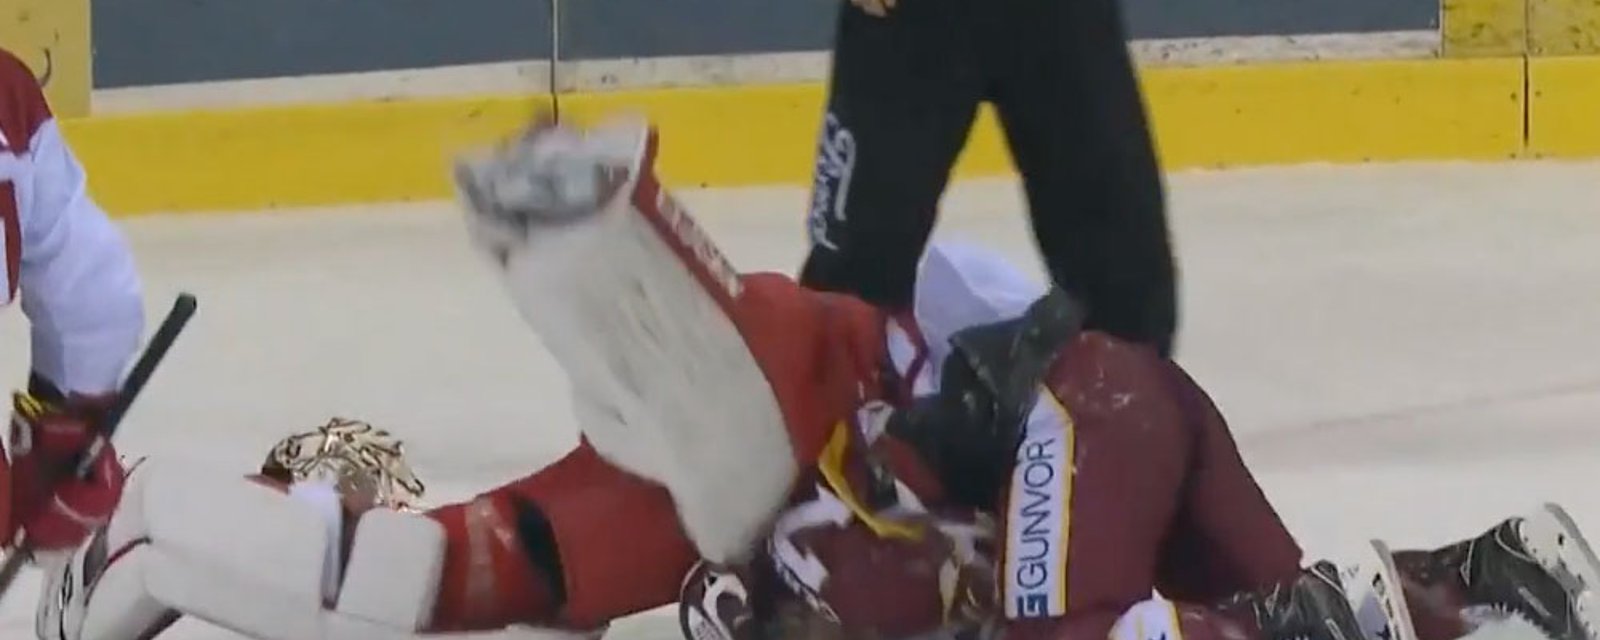 MUST SEE: Shortest player in history tries to throw heavy punches at goalie!